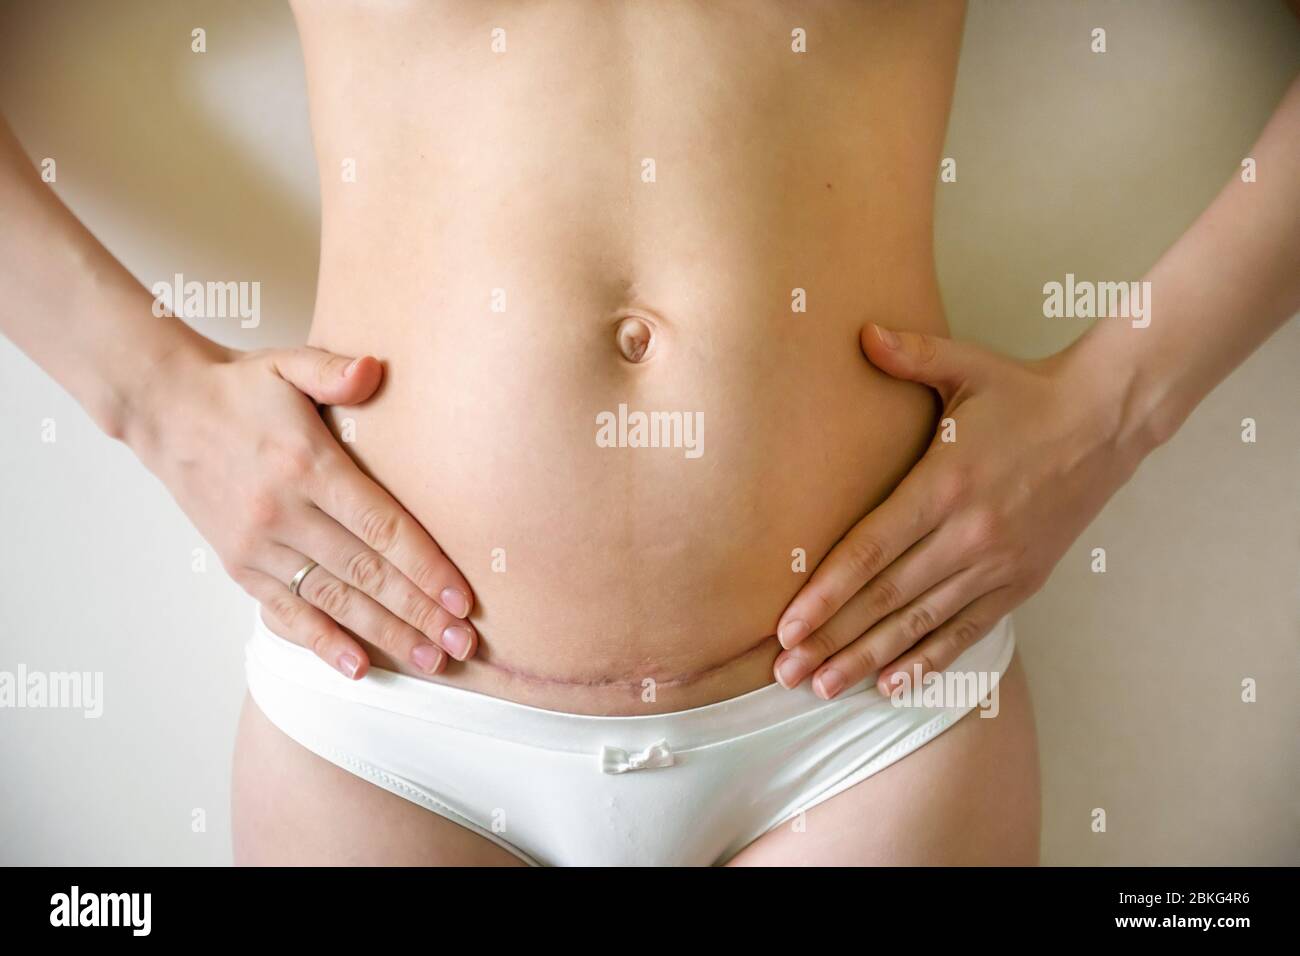 Closeup of woman belly with scar from a cesarean section Stock Photo